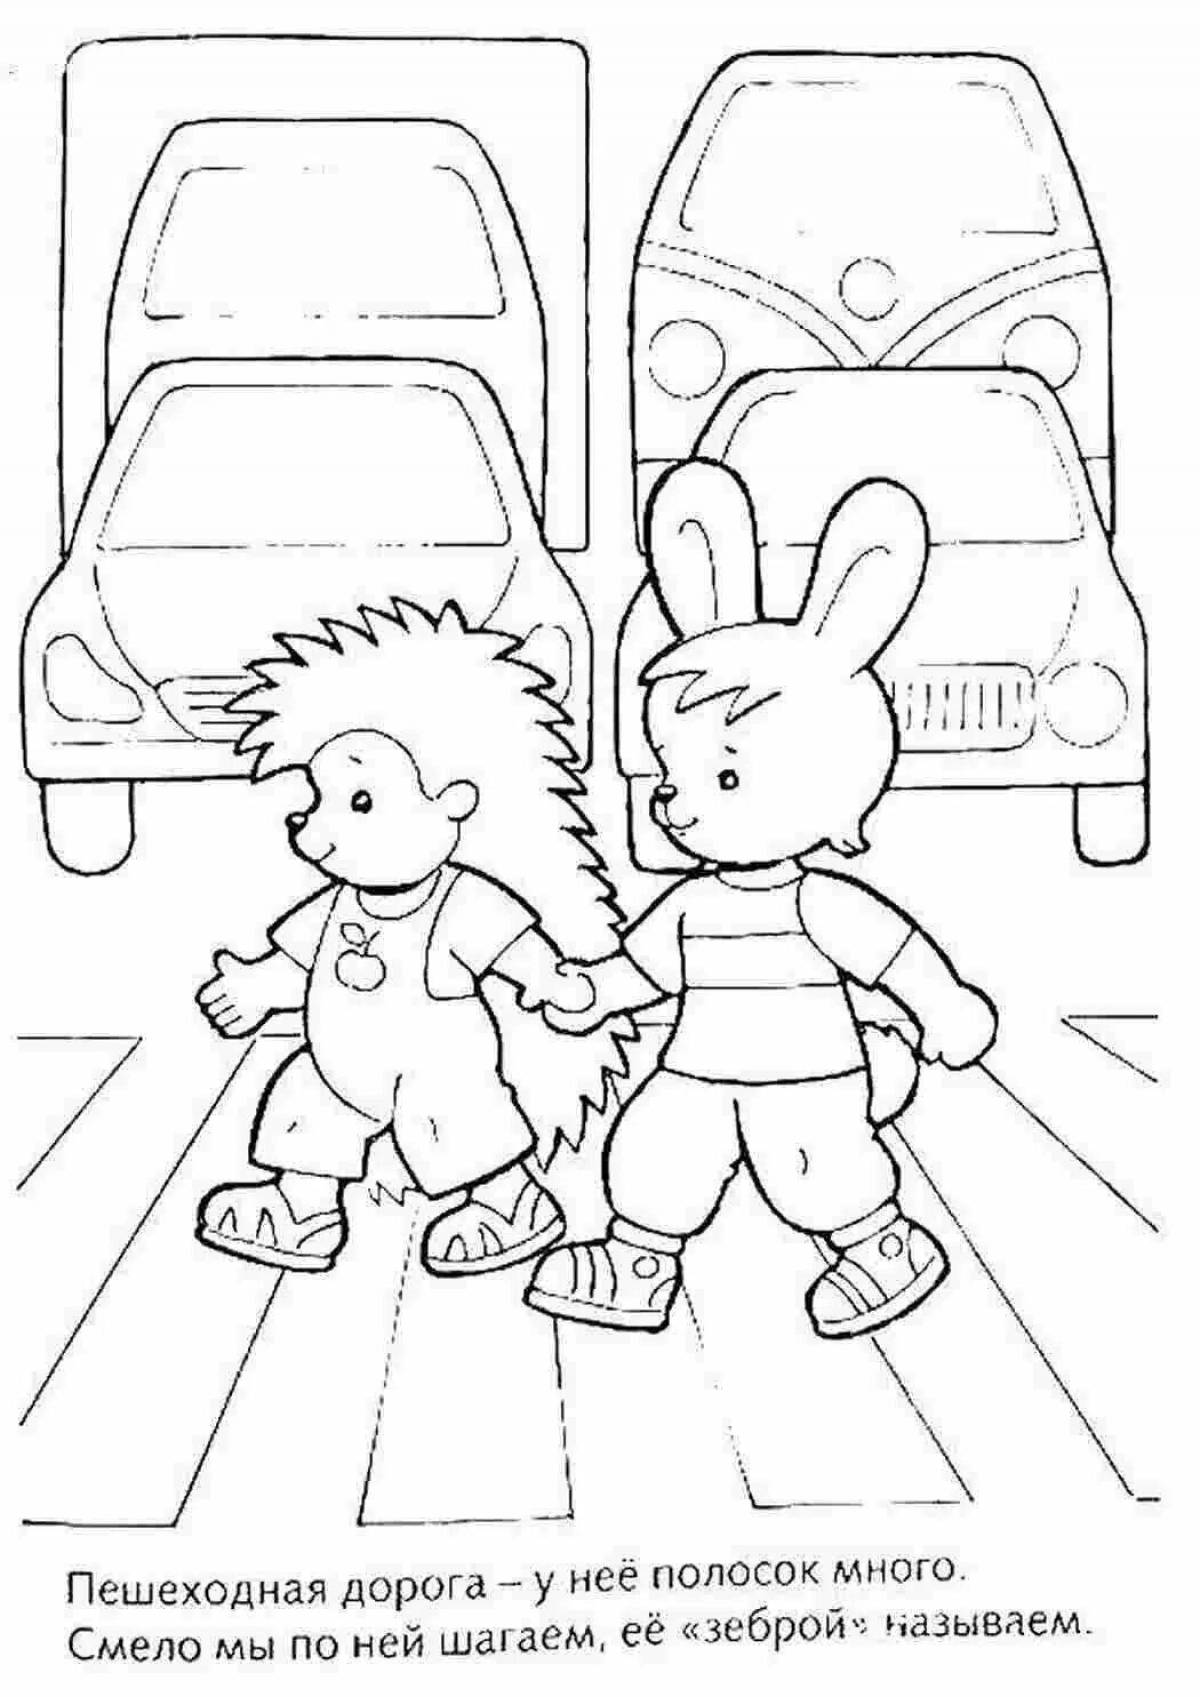 High school traffic rules coloring book